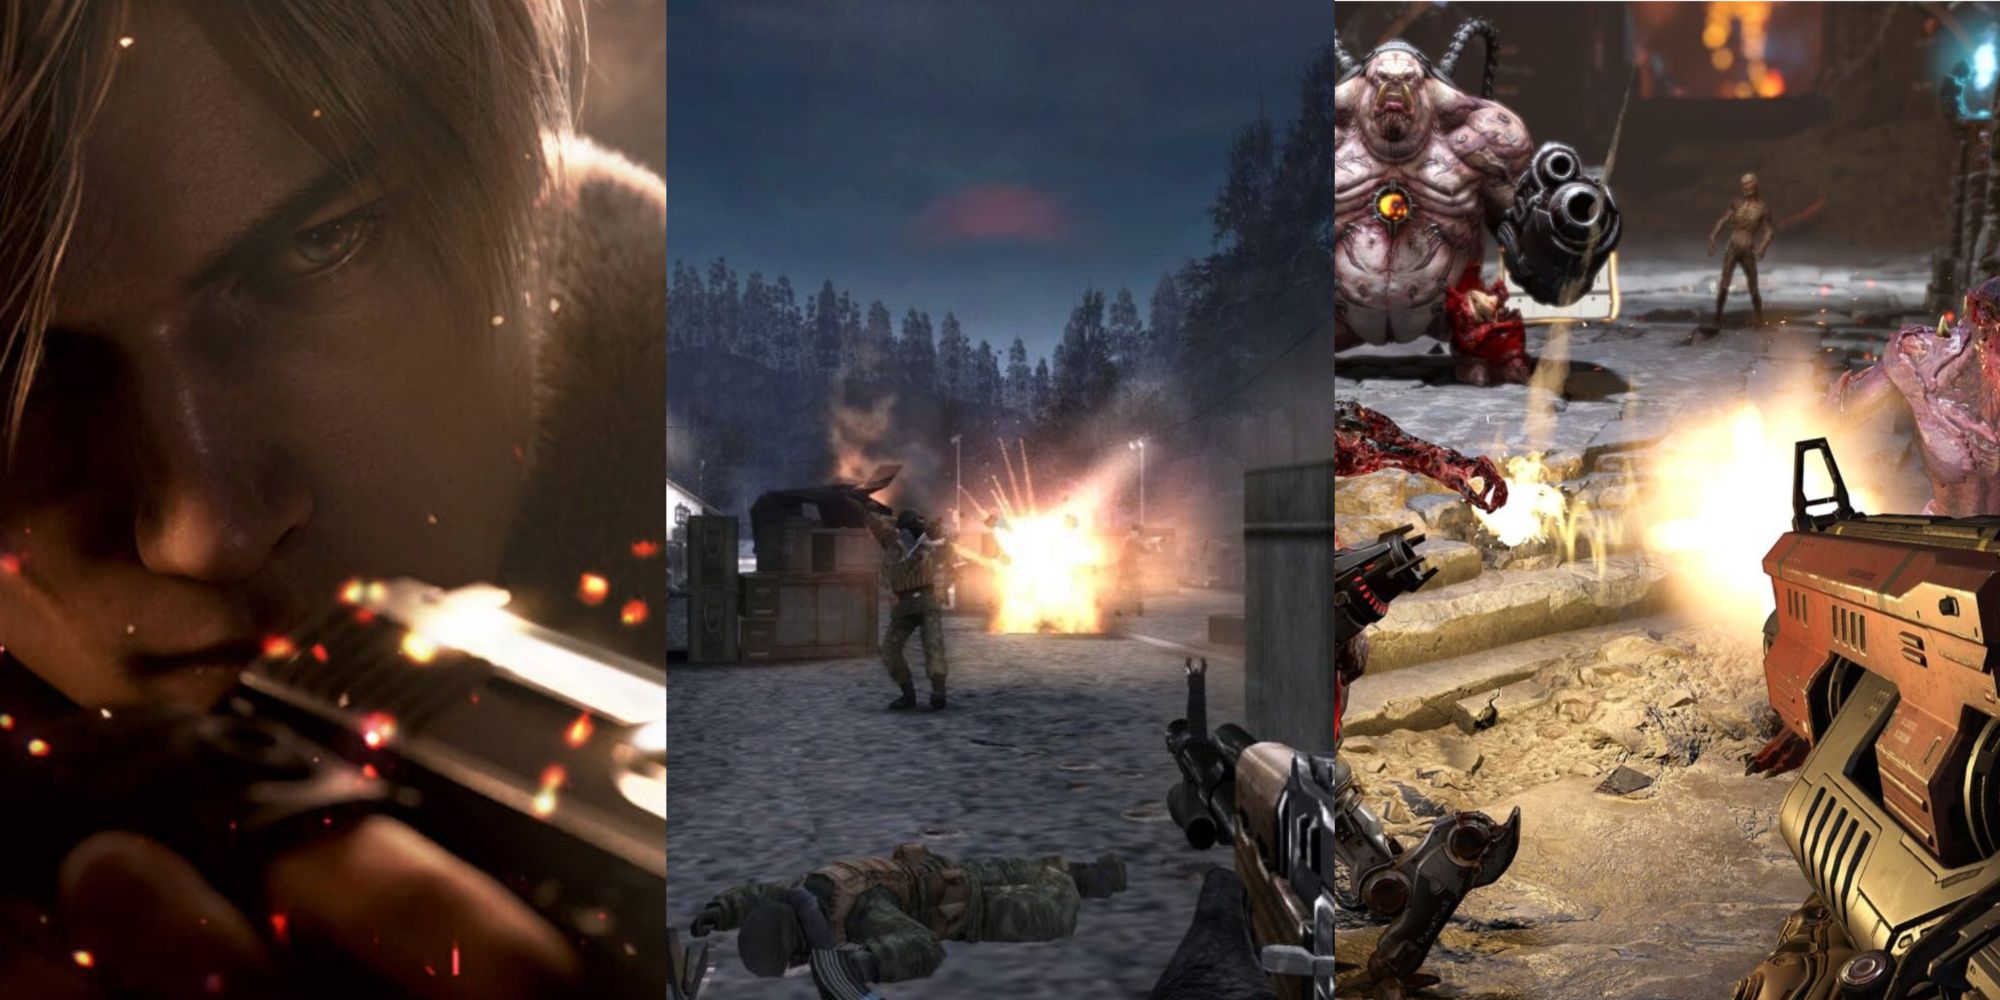 Leon aiming his handgun amidst embers, battle on a bridge in Black, attacking multiple demons in Doom, left to right